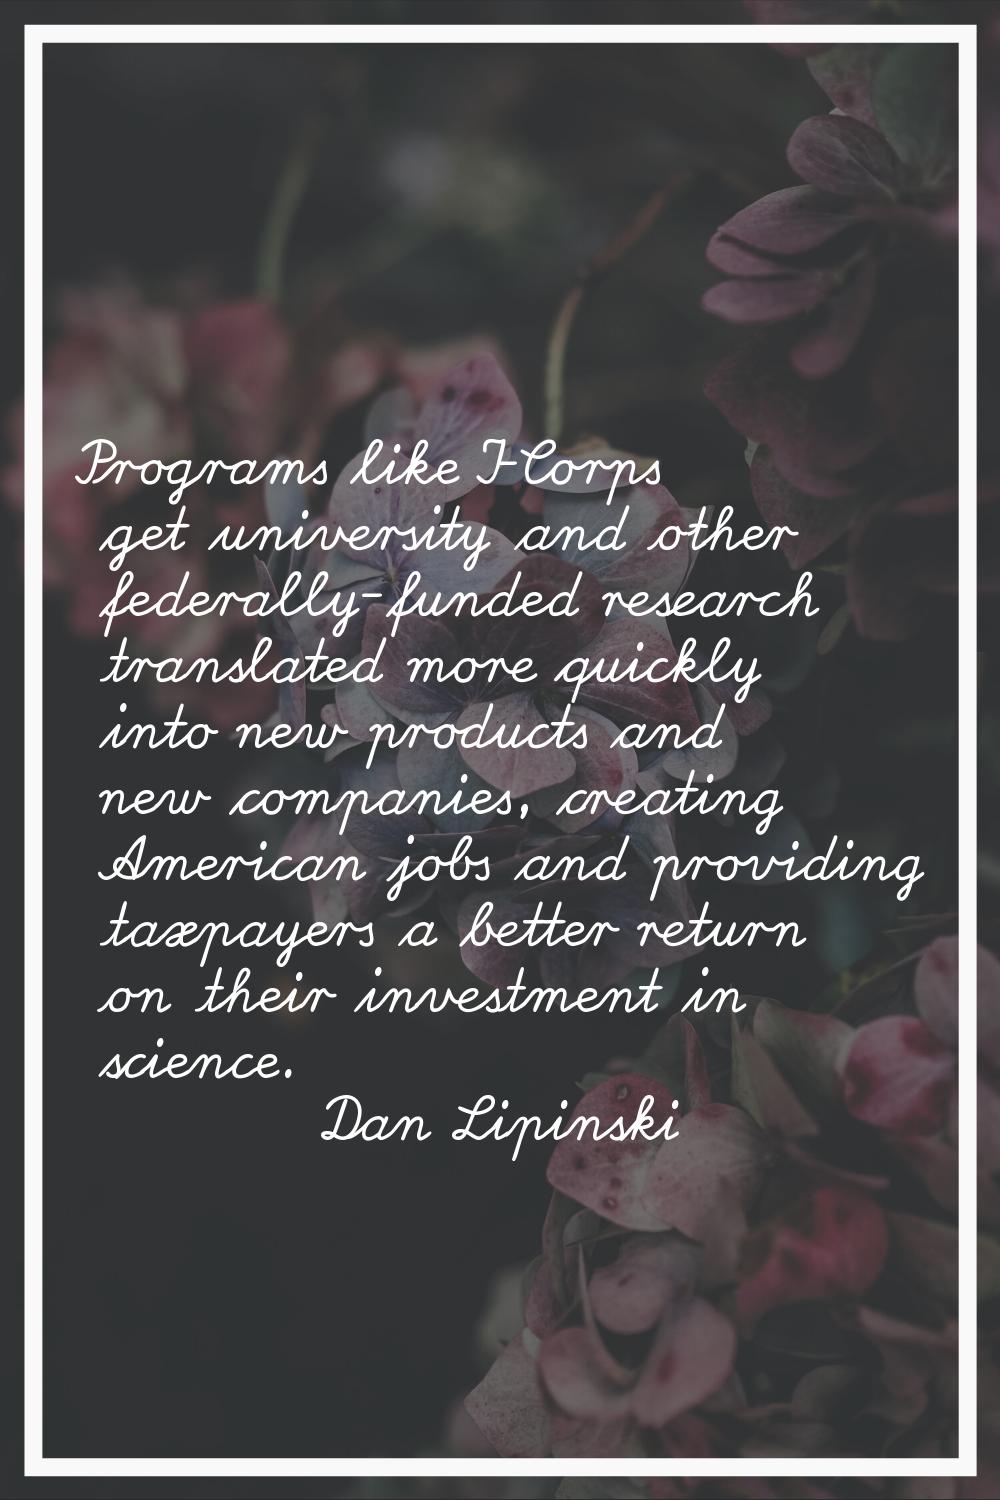 Programs like I-Corps get university and other federally-funded research translated more quickly in